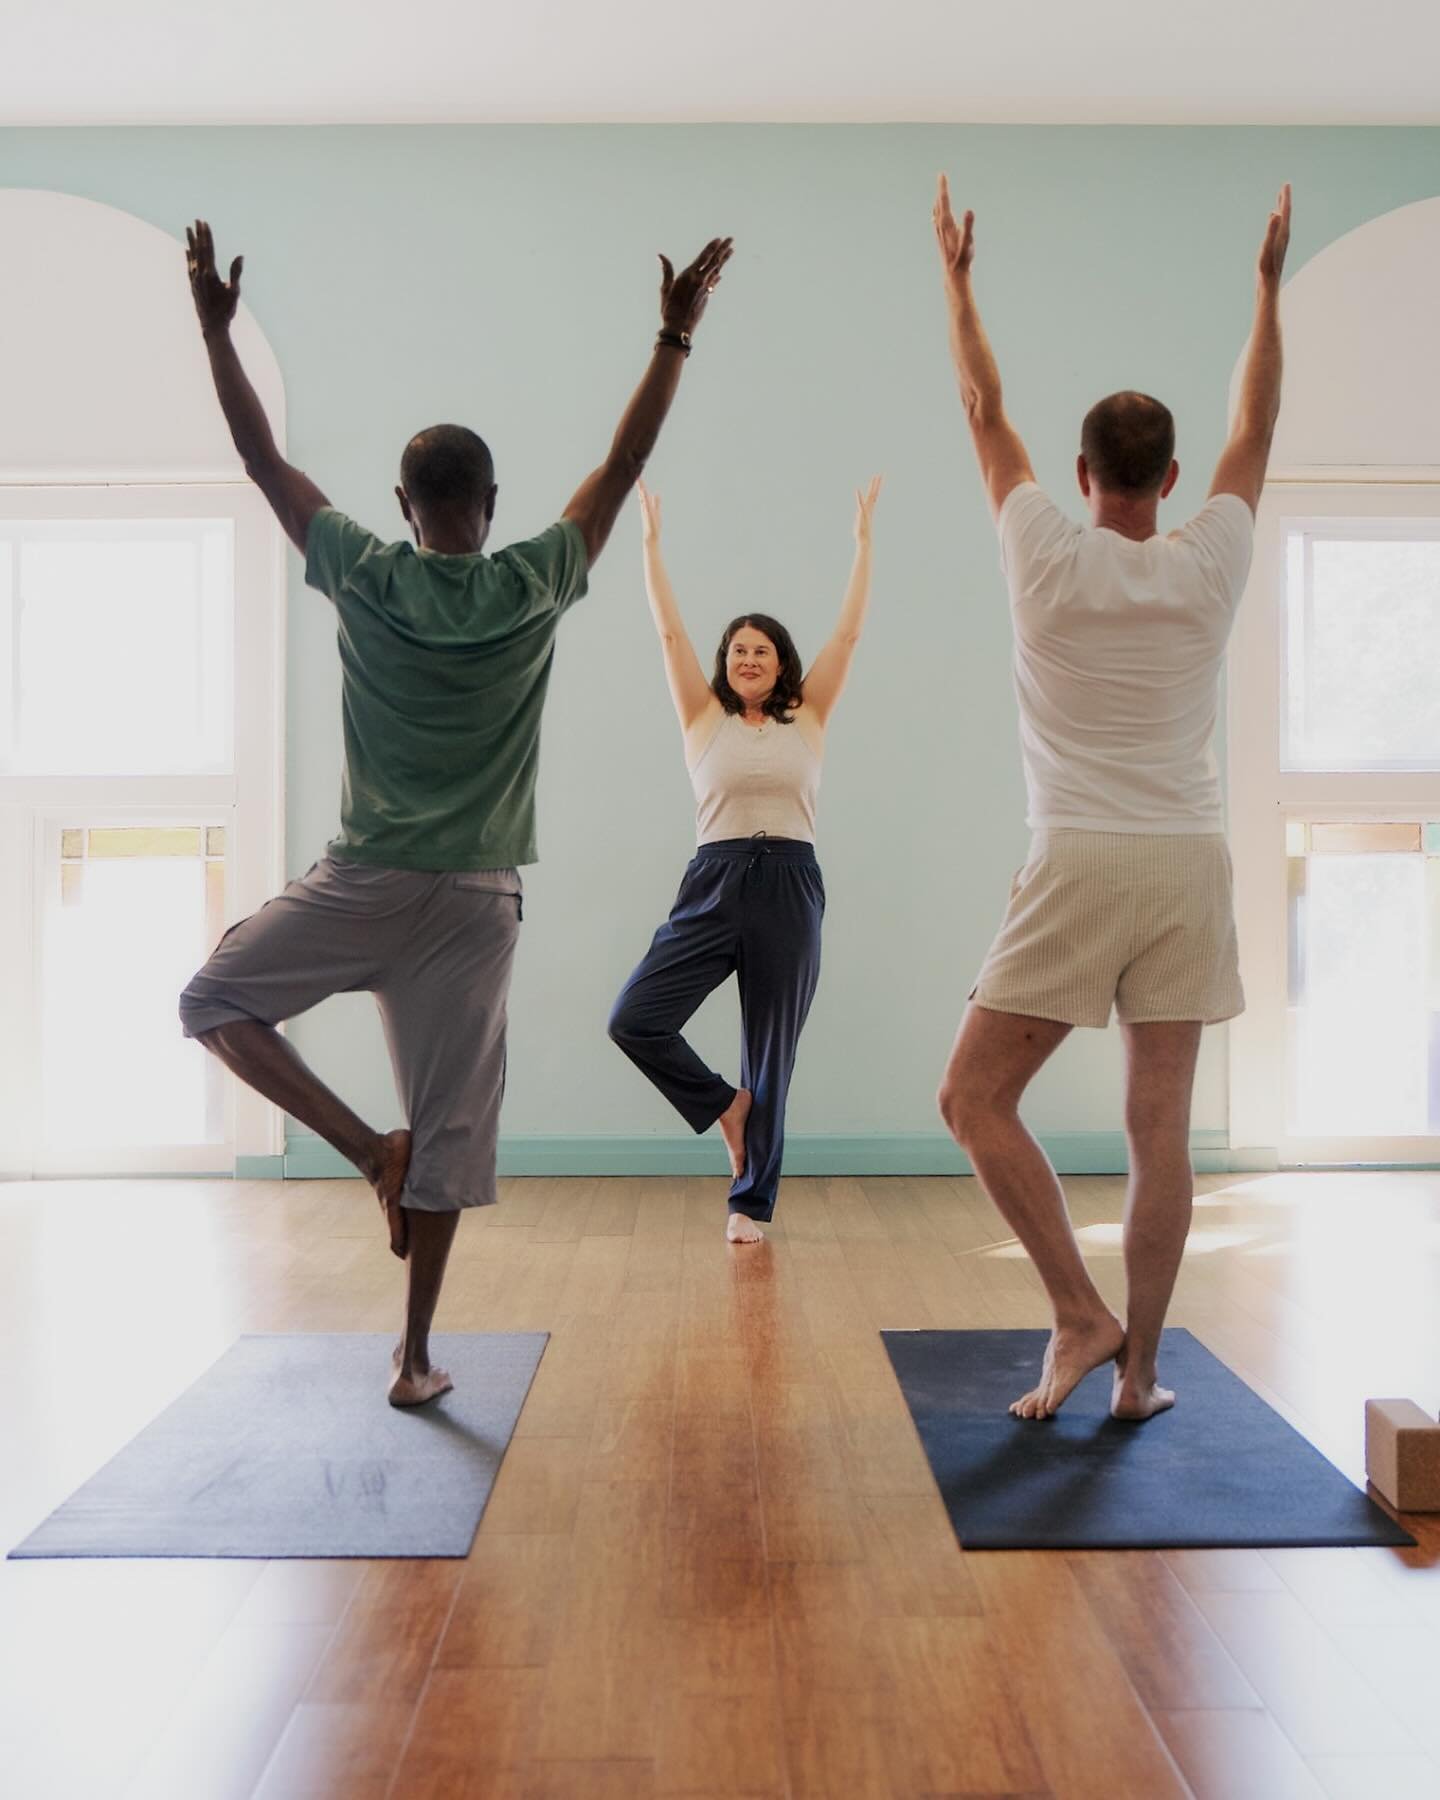 Join us Saturday, June 15 from 2-4:30pm for an Alignment Workshop with @anniegirvs. Explore your joint movements, strength, flexbility and more in this afternoon of anatomy, asana and most of all fun! 🤗

All levels of students are encouraged to atte